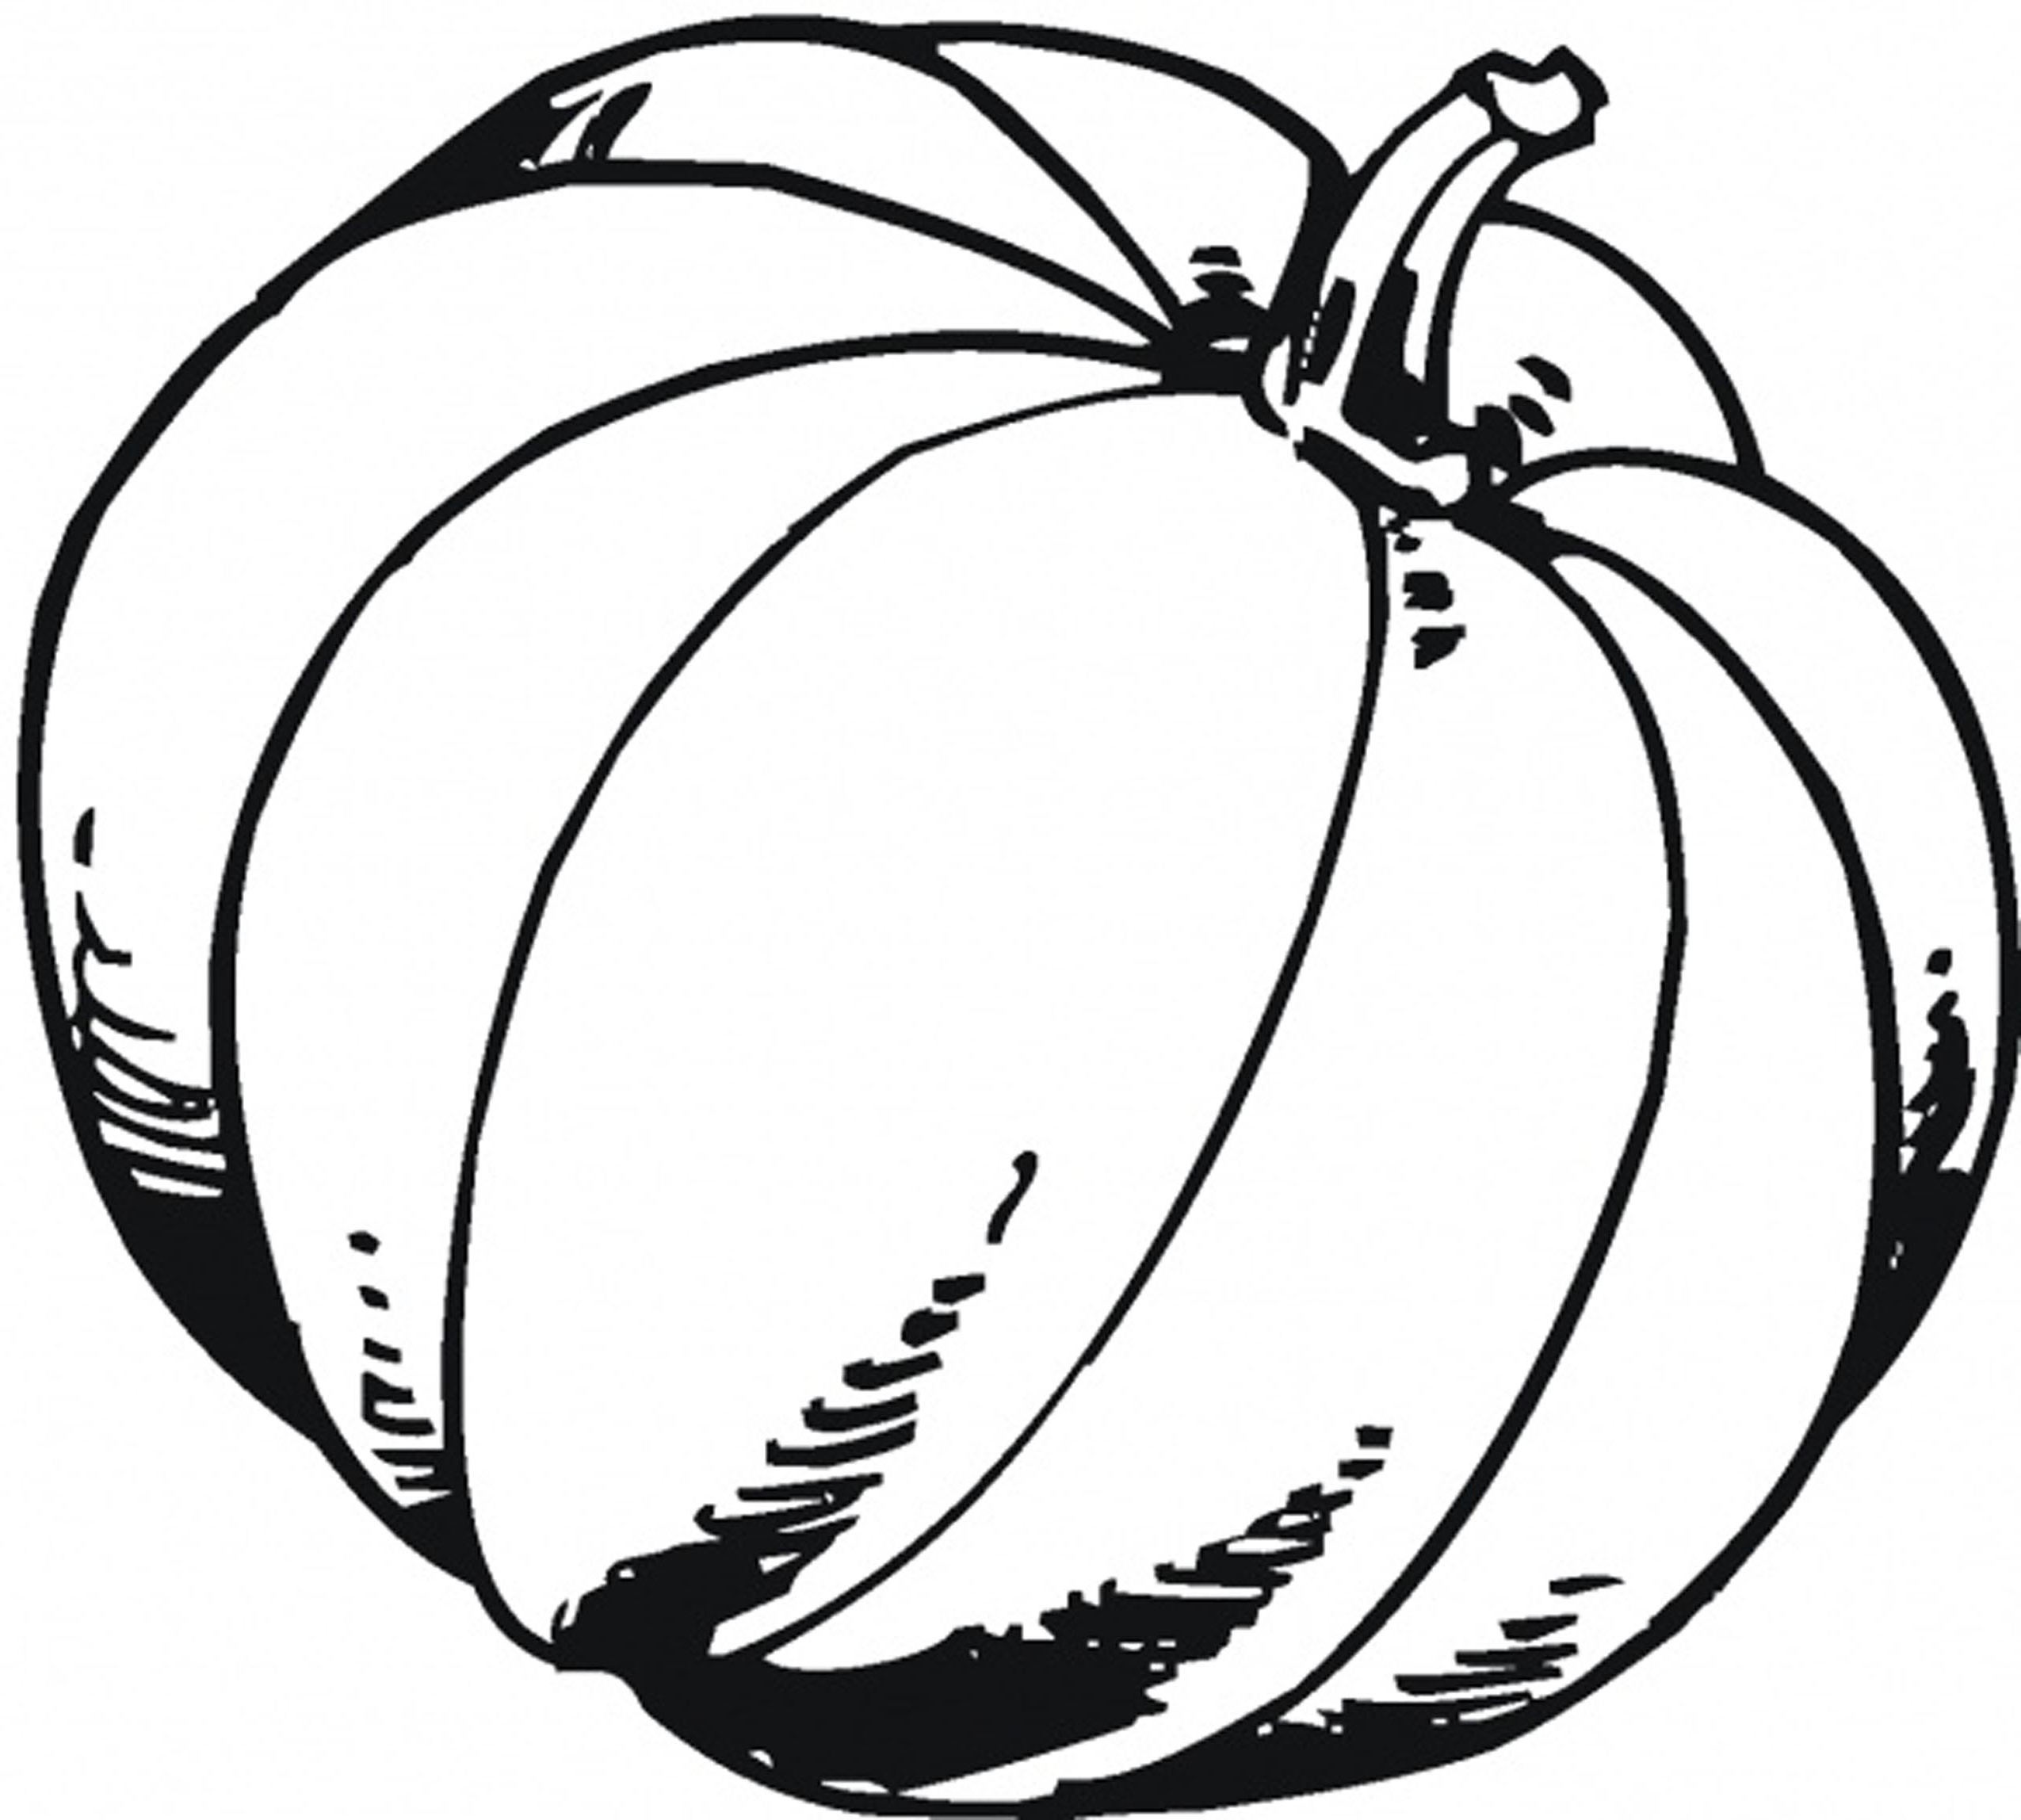 Pumpkin Patch Coloring Page | Free download on ClipArtMag